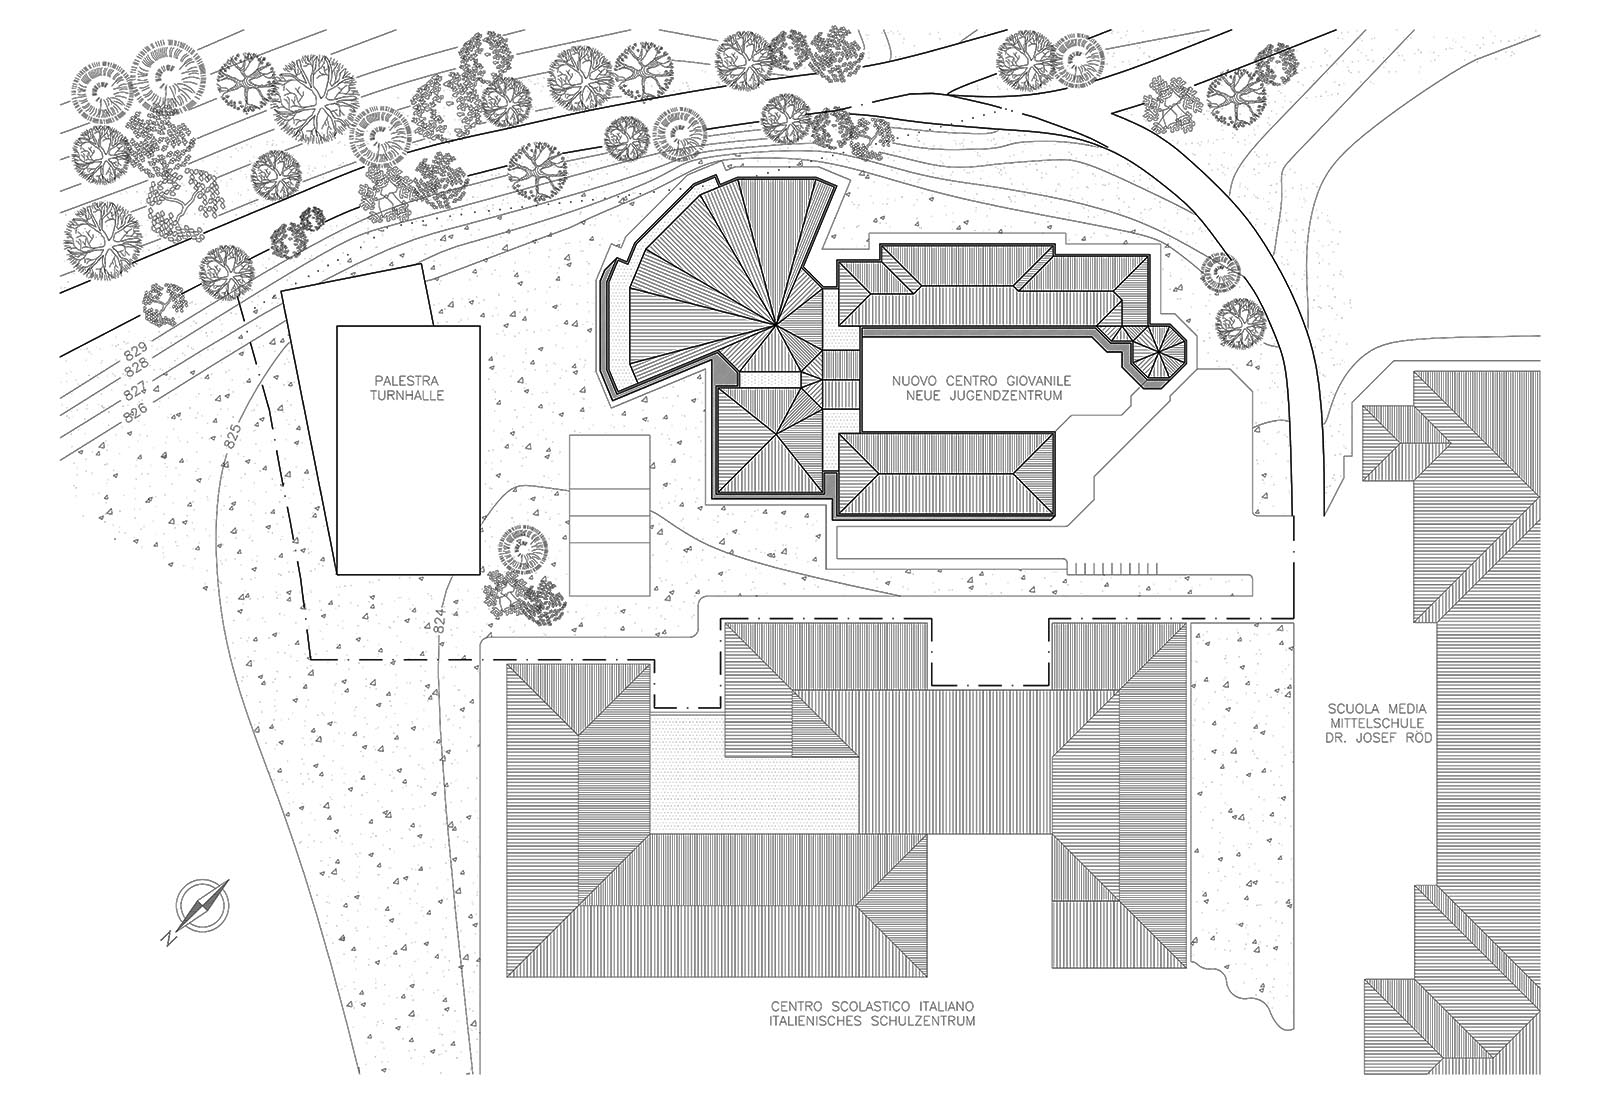 Youth center in Brunico - General plan